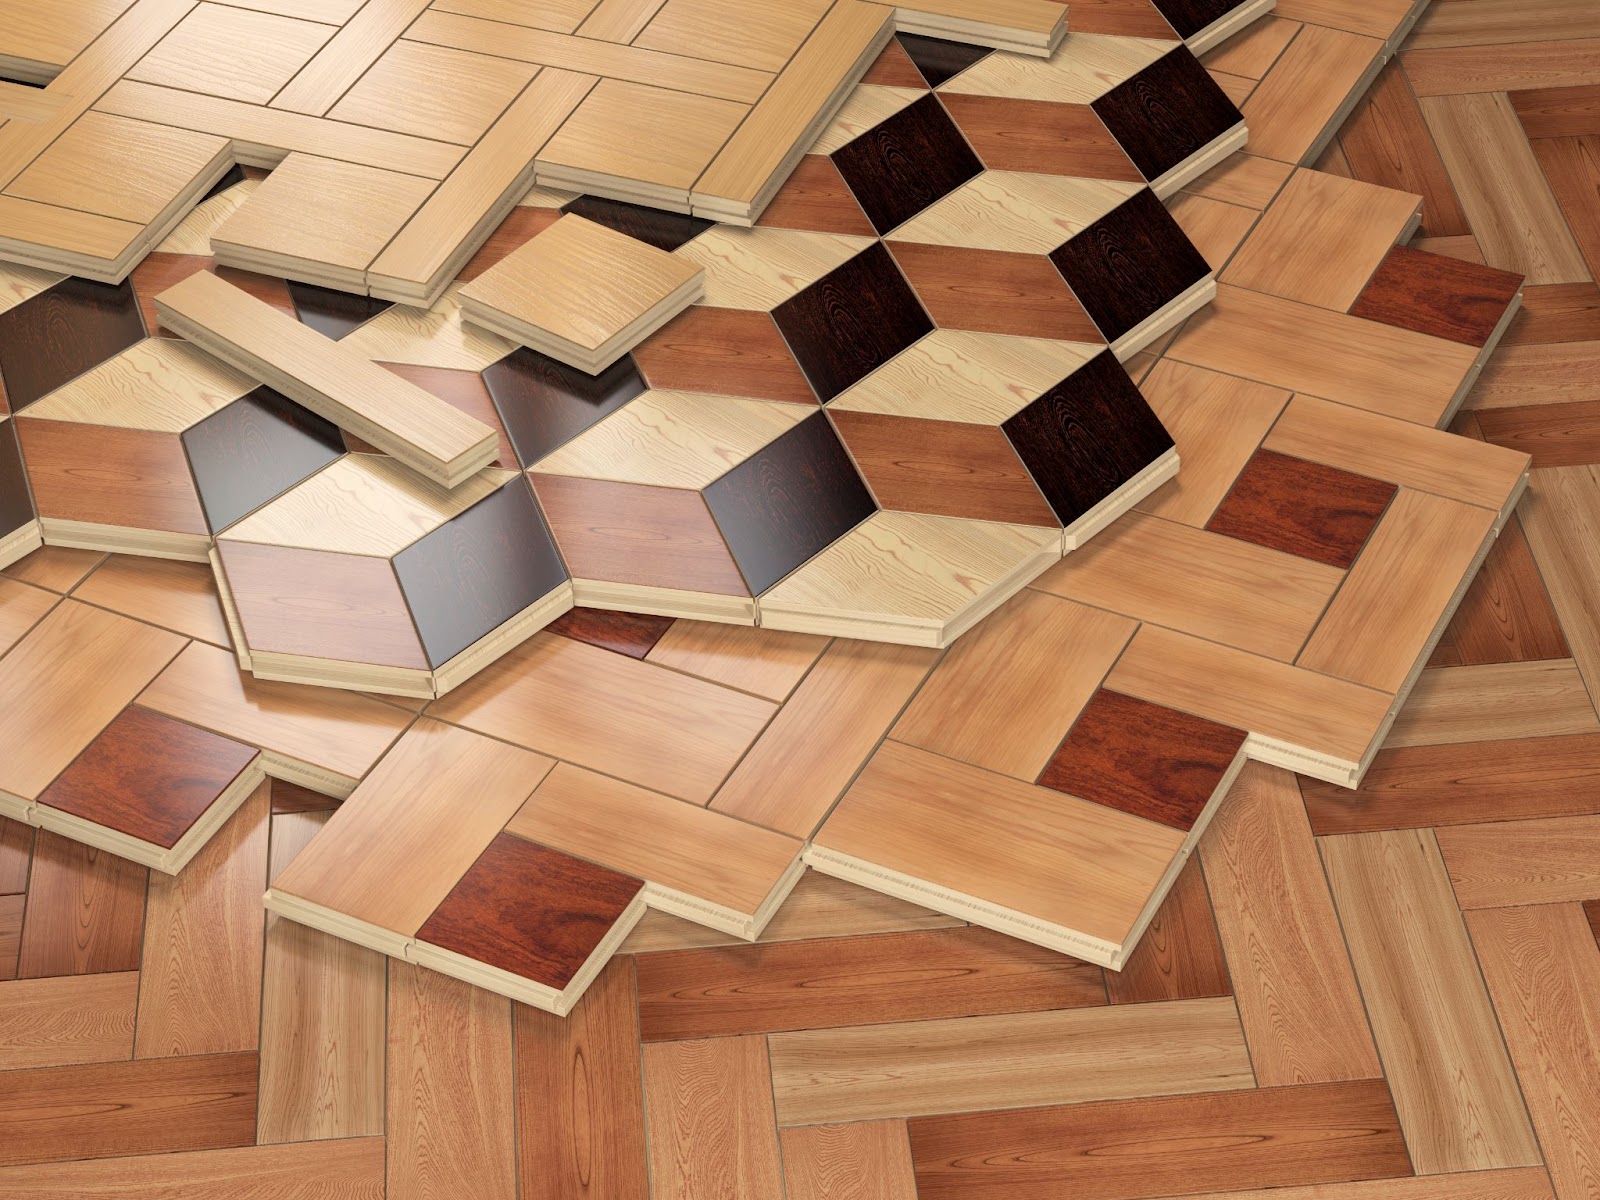 A stack of parquet wooden planks neatly arranged to showcase their natural wood grain and smooth finish.